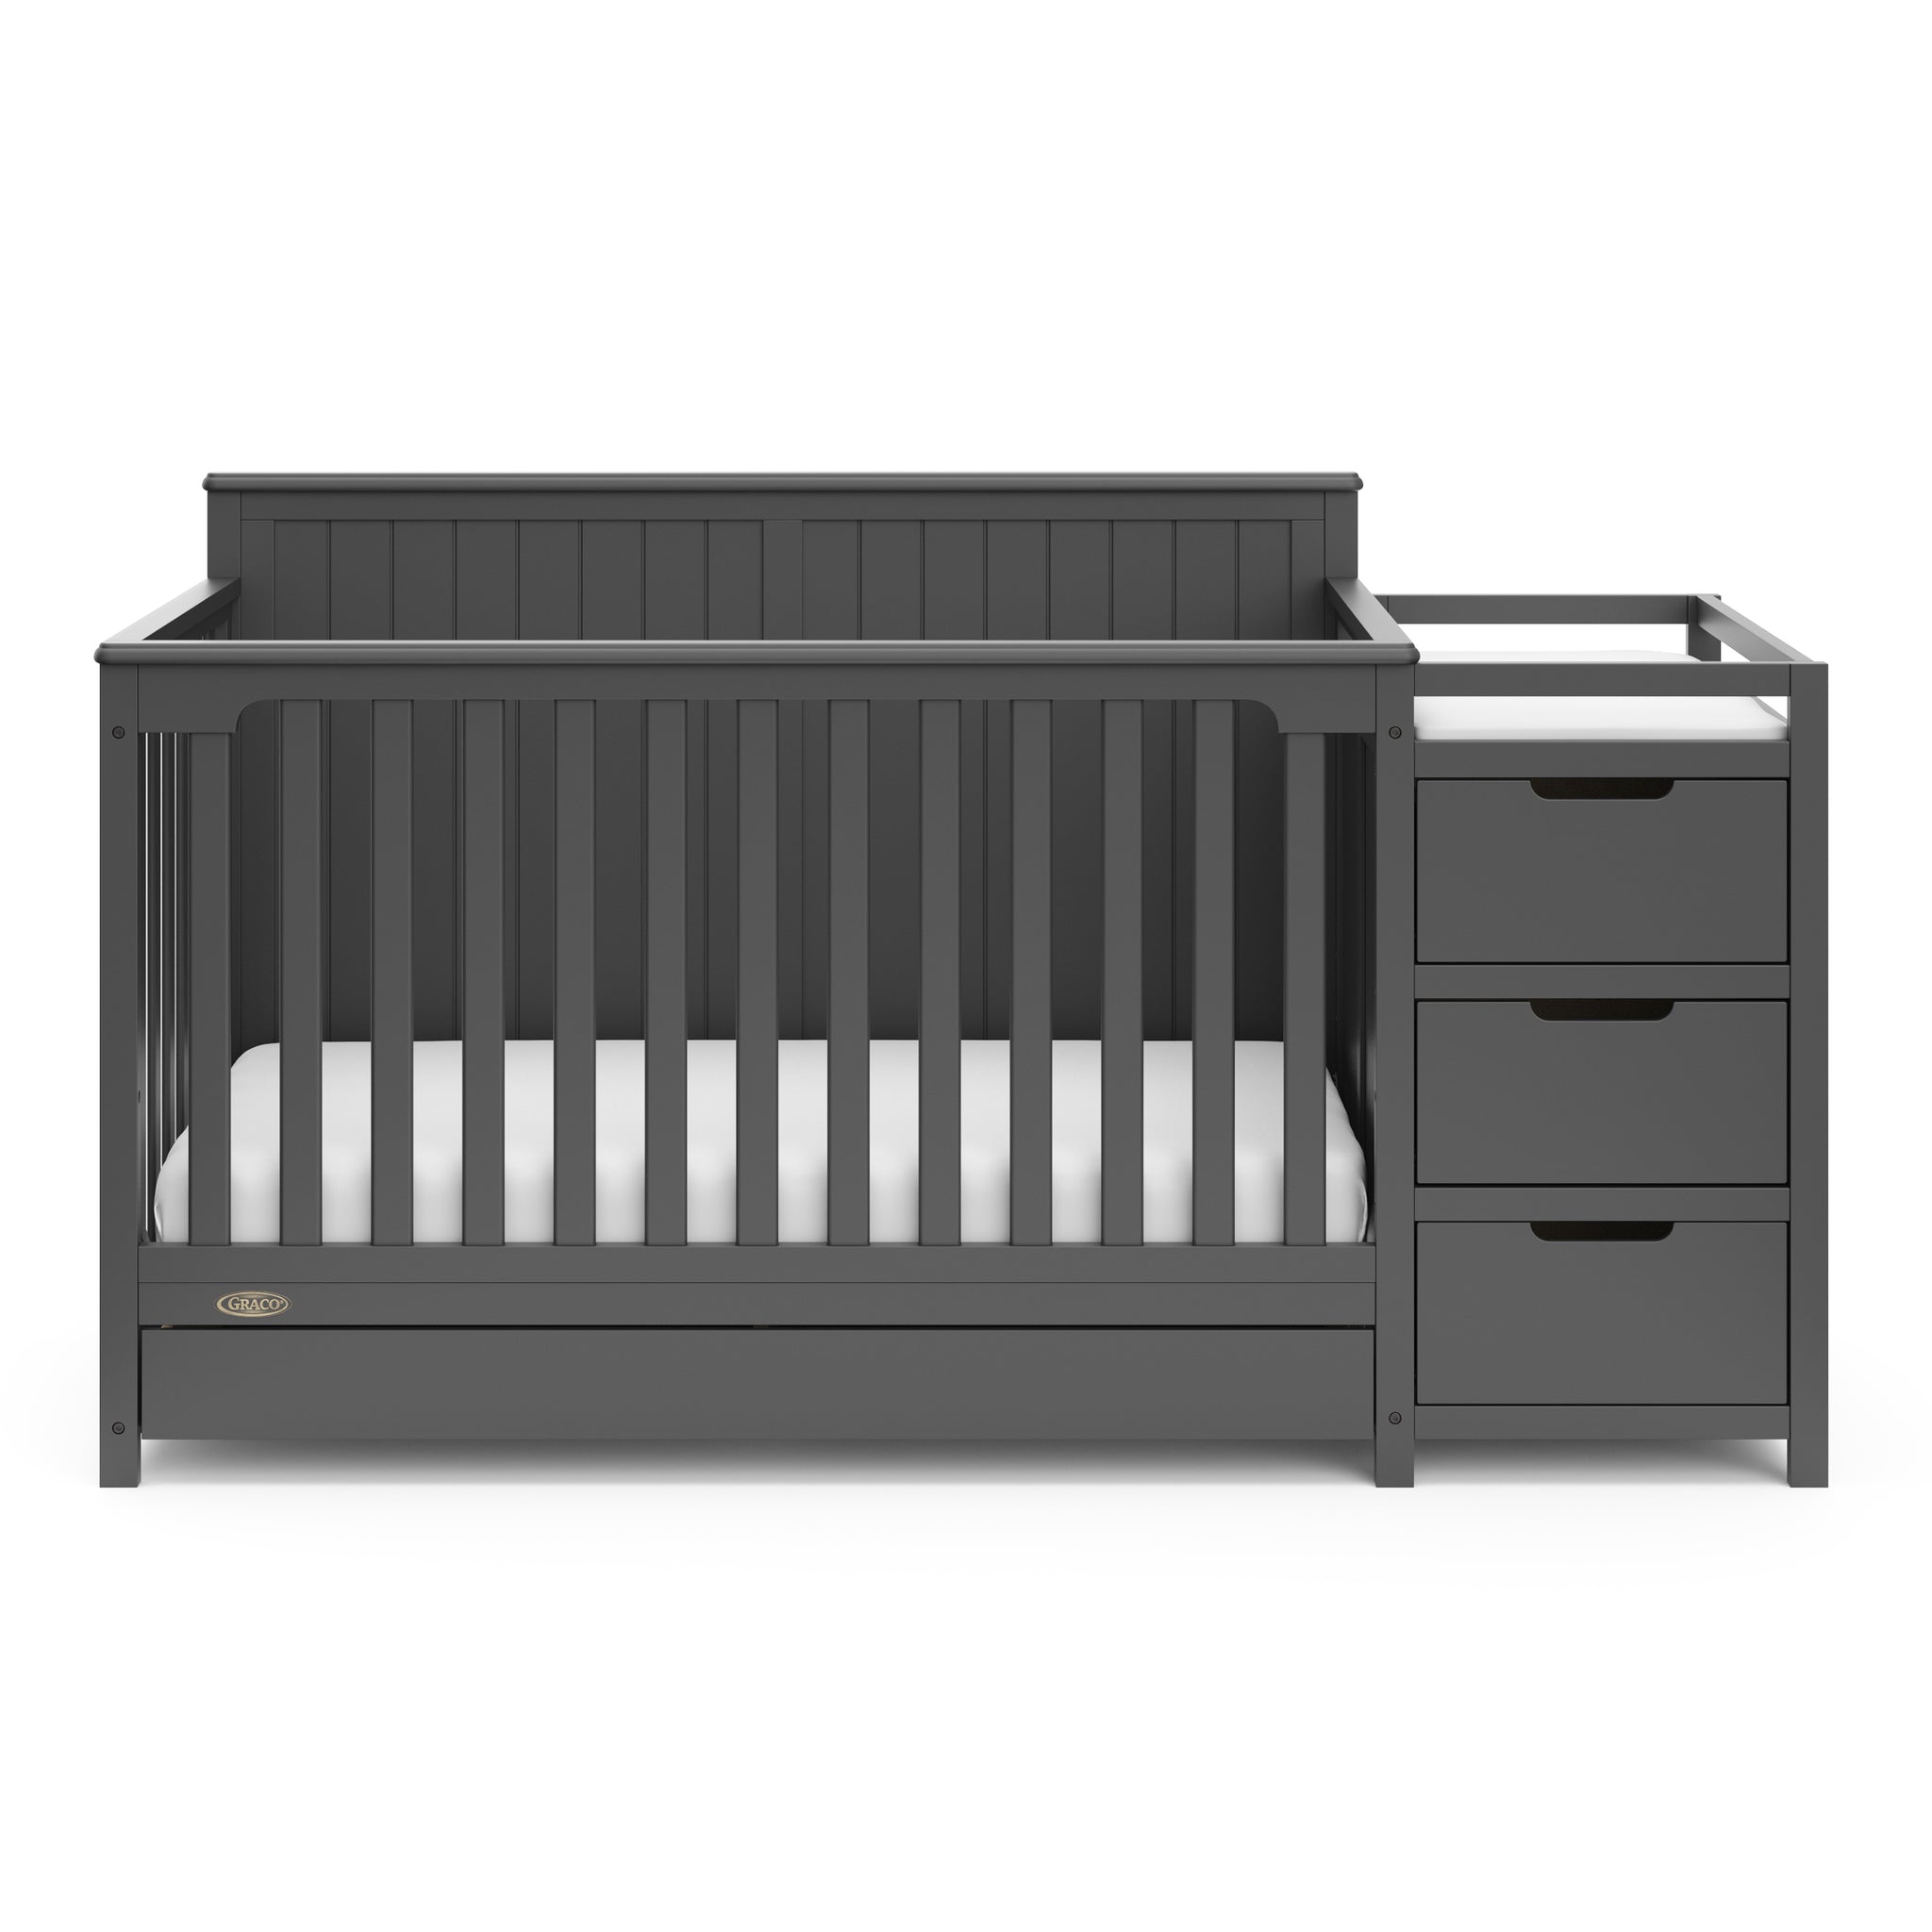 Front view of gray crib with drawer and changer with drawer